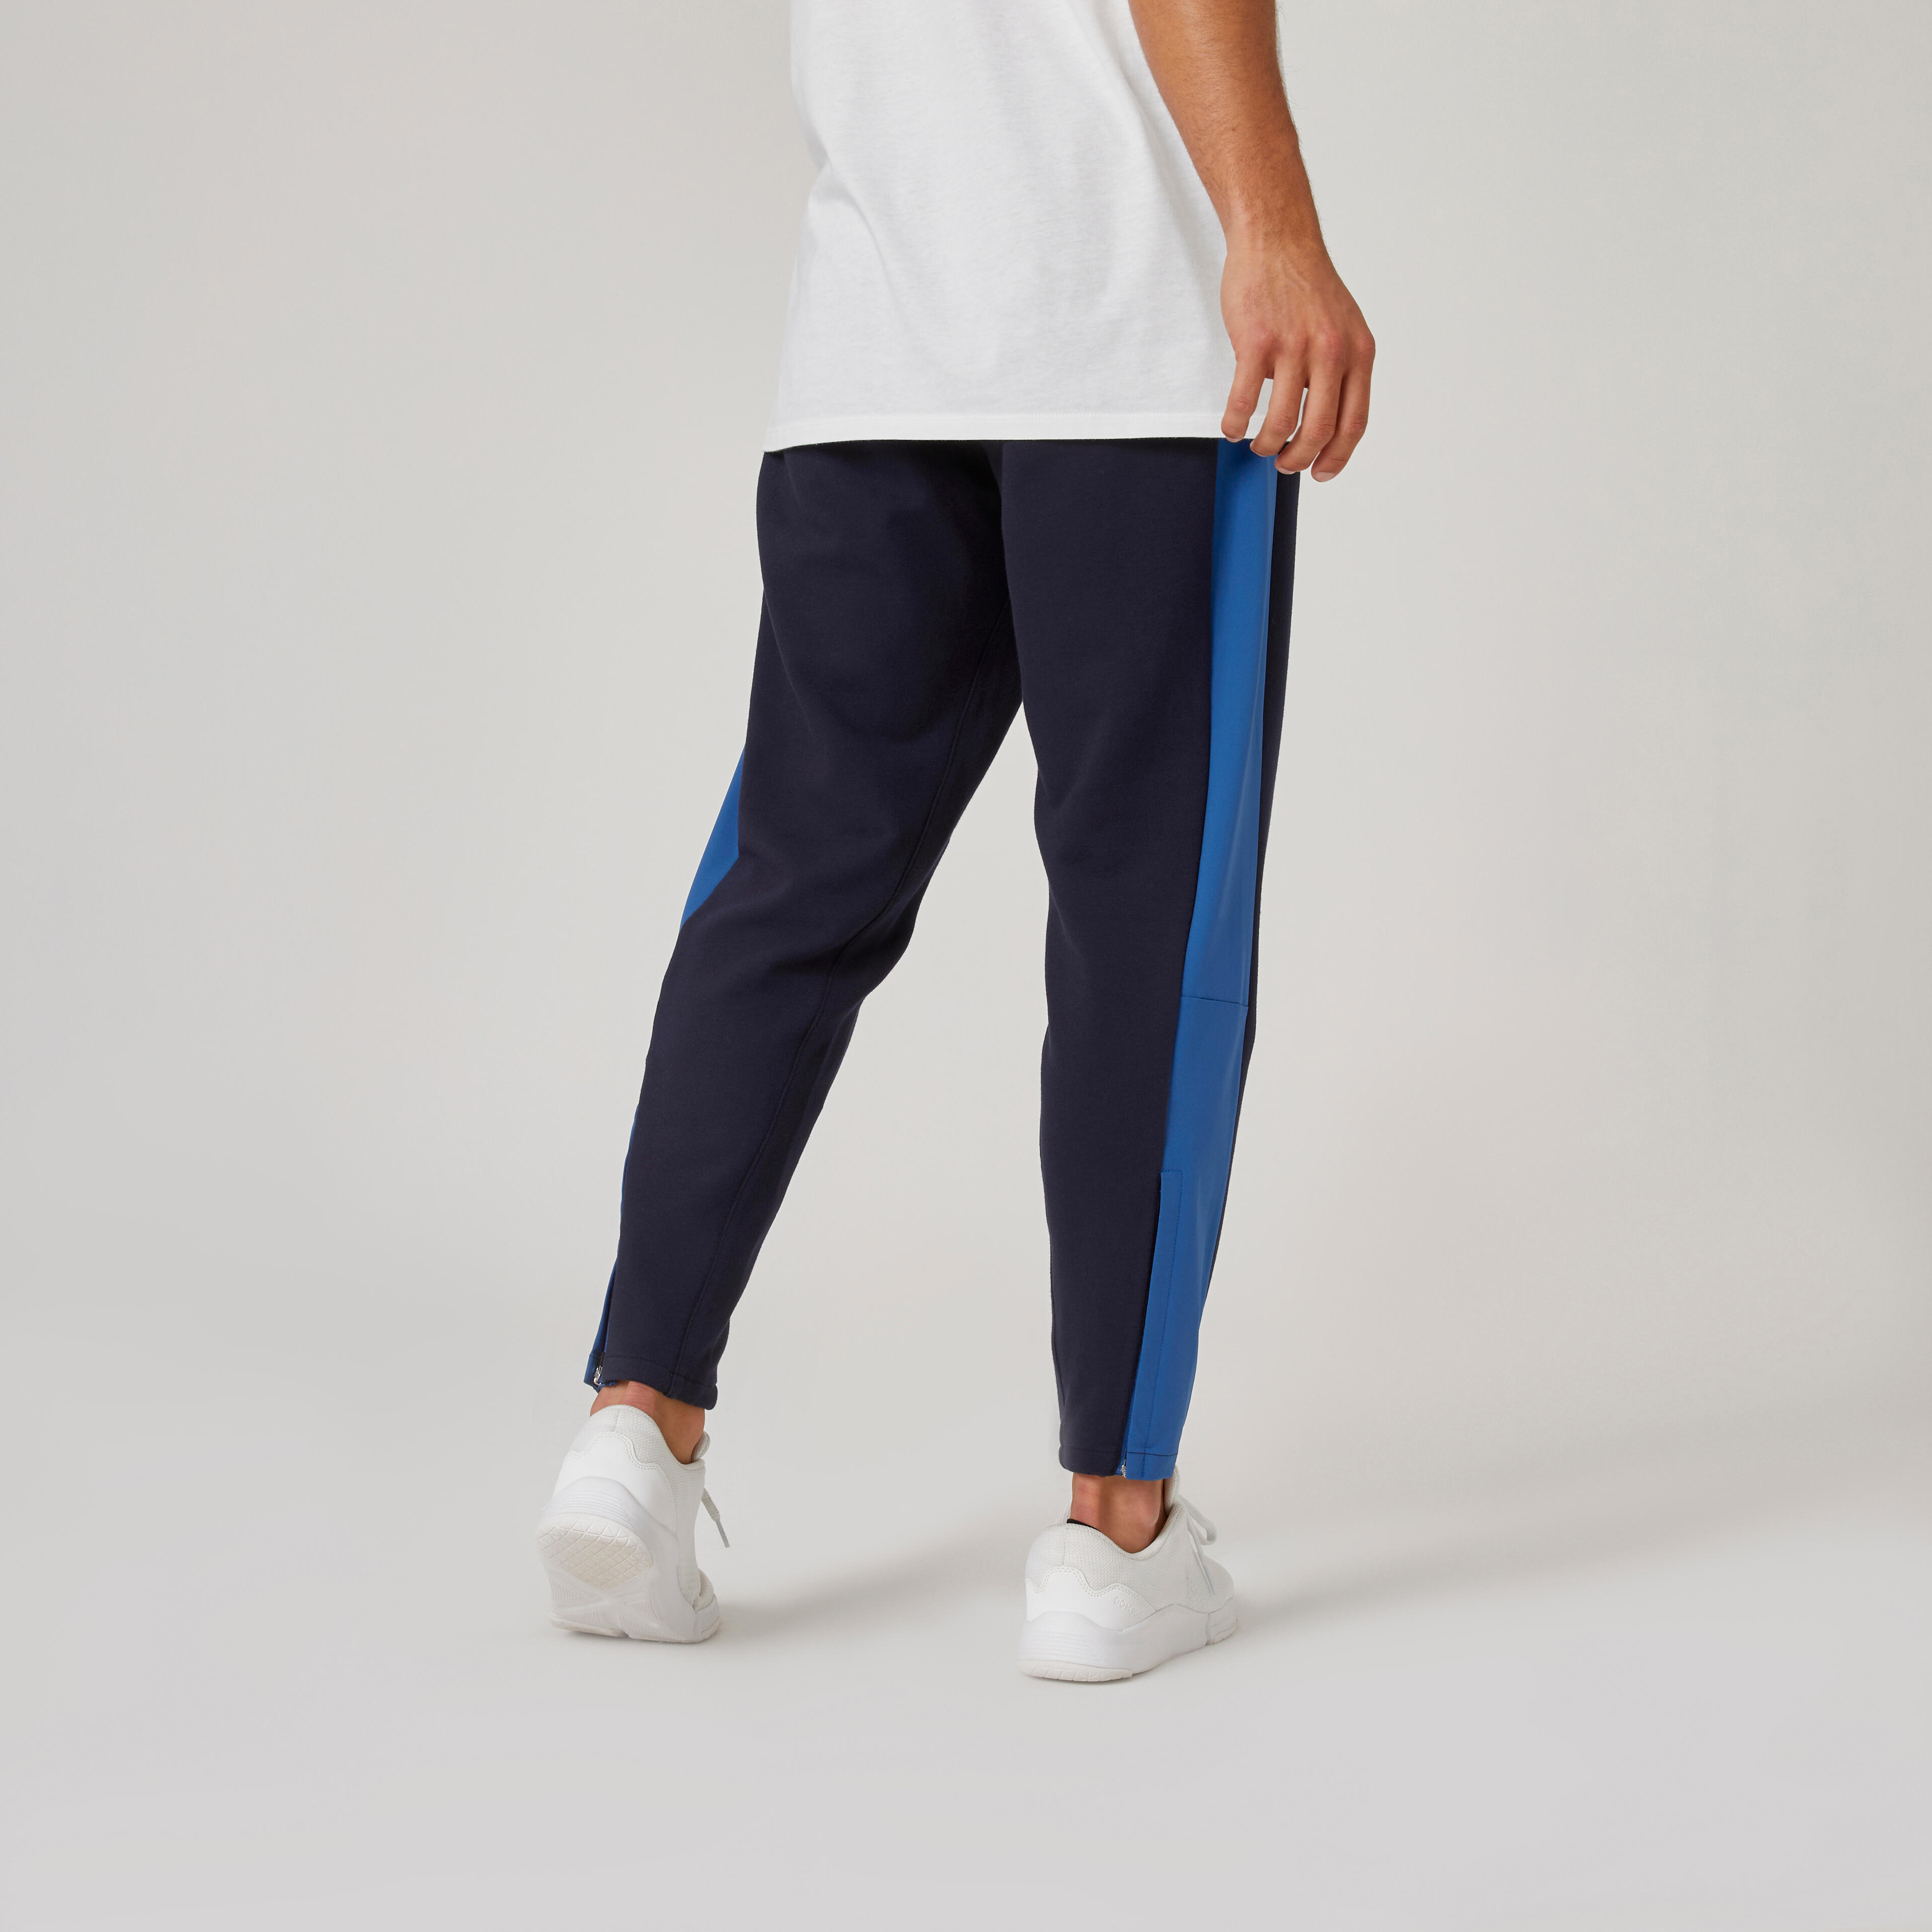 Decathlon Sports India  Heres an amazing offer on Sweat managing straight  fit track pants buymoresavemore Order now httpswwwdecathloninqr86109421  decathlonkompally decathlonsportsindia sale offer  Facebook